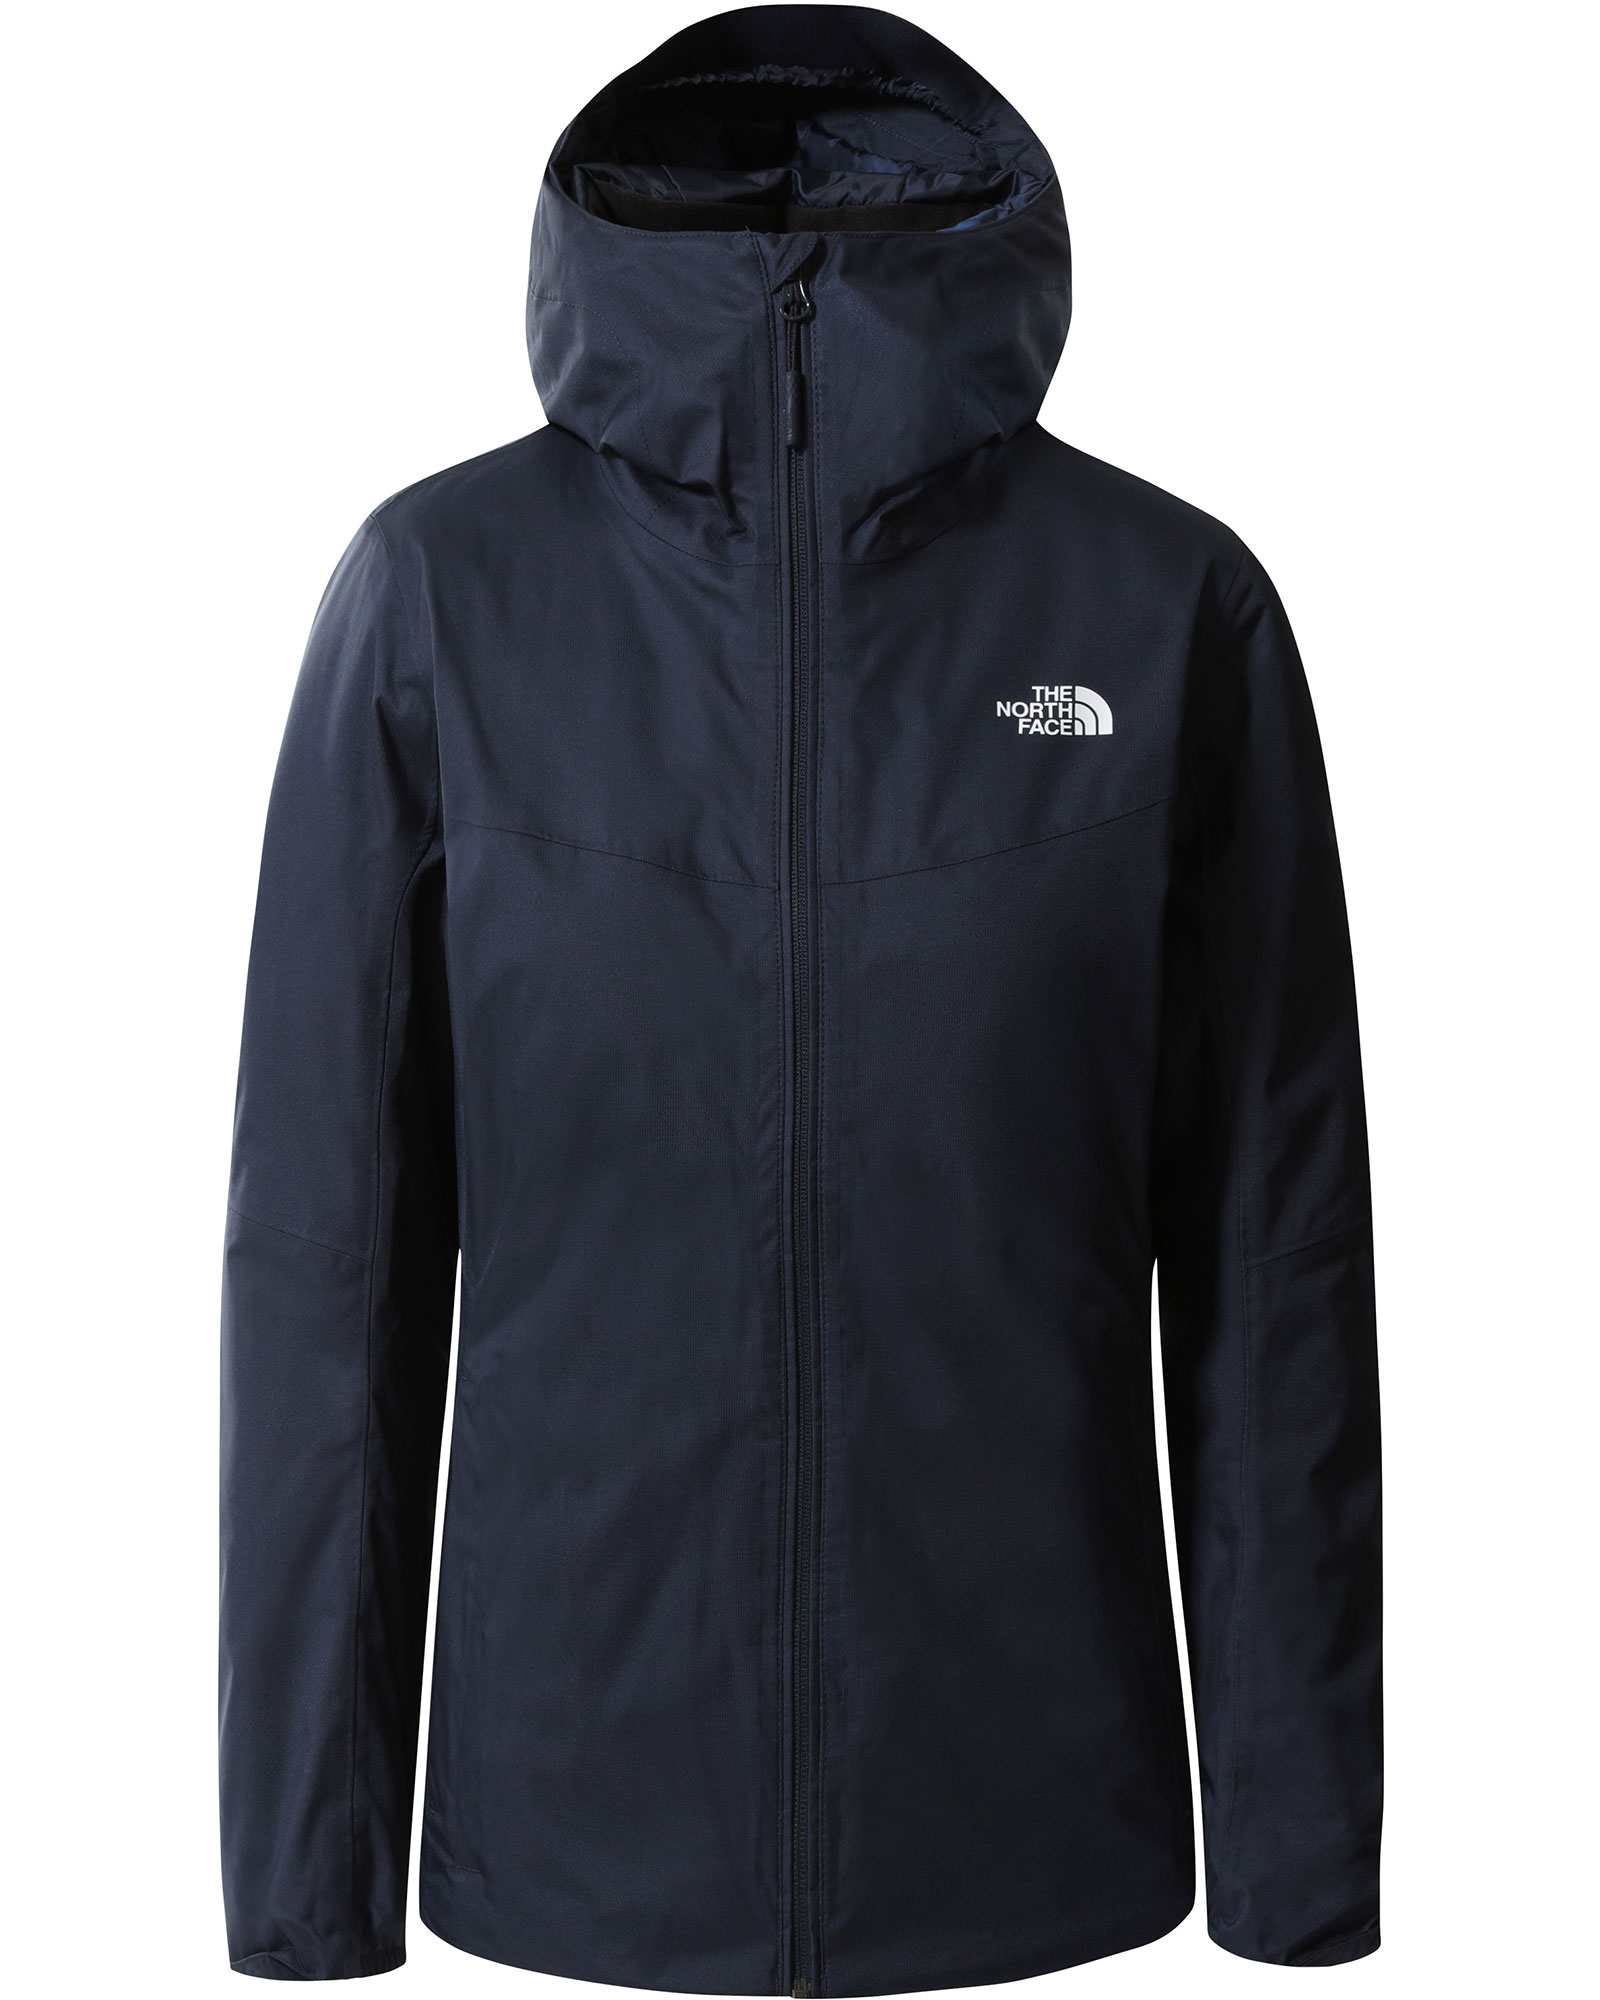 The North Face Quest DryVent Women’s Insulated Jacket - Urban Navy XS